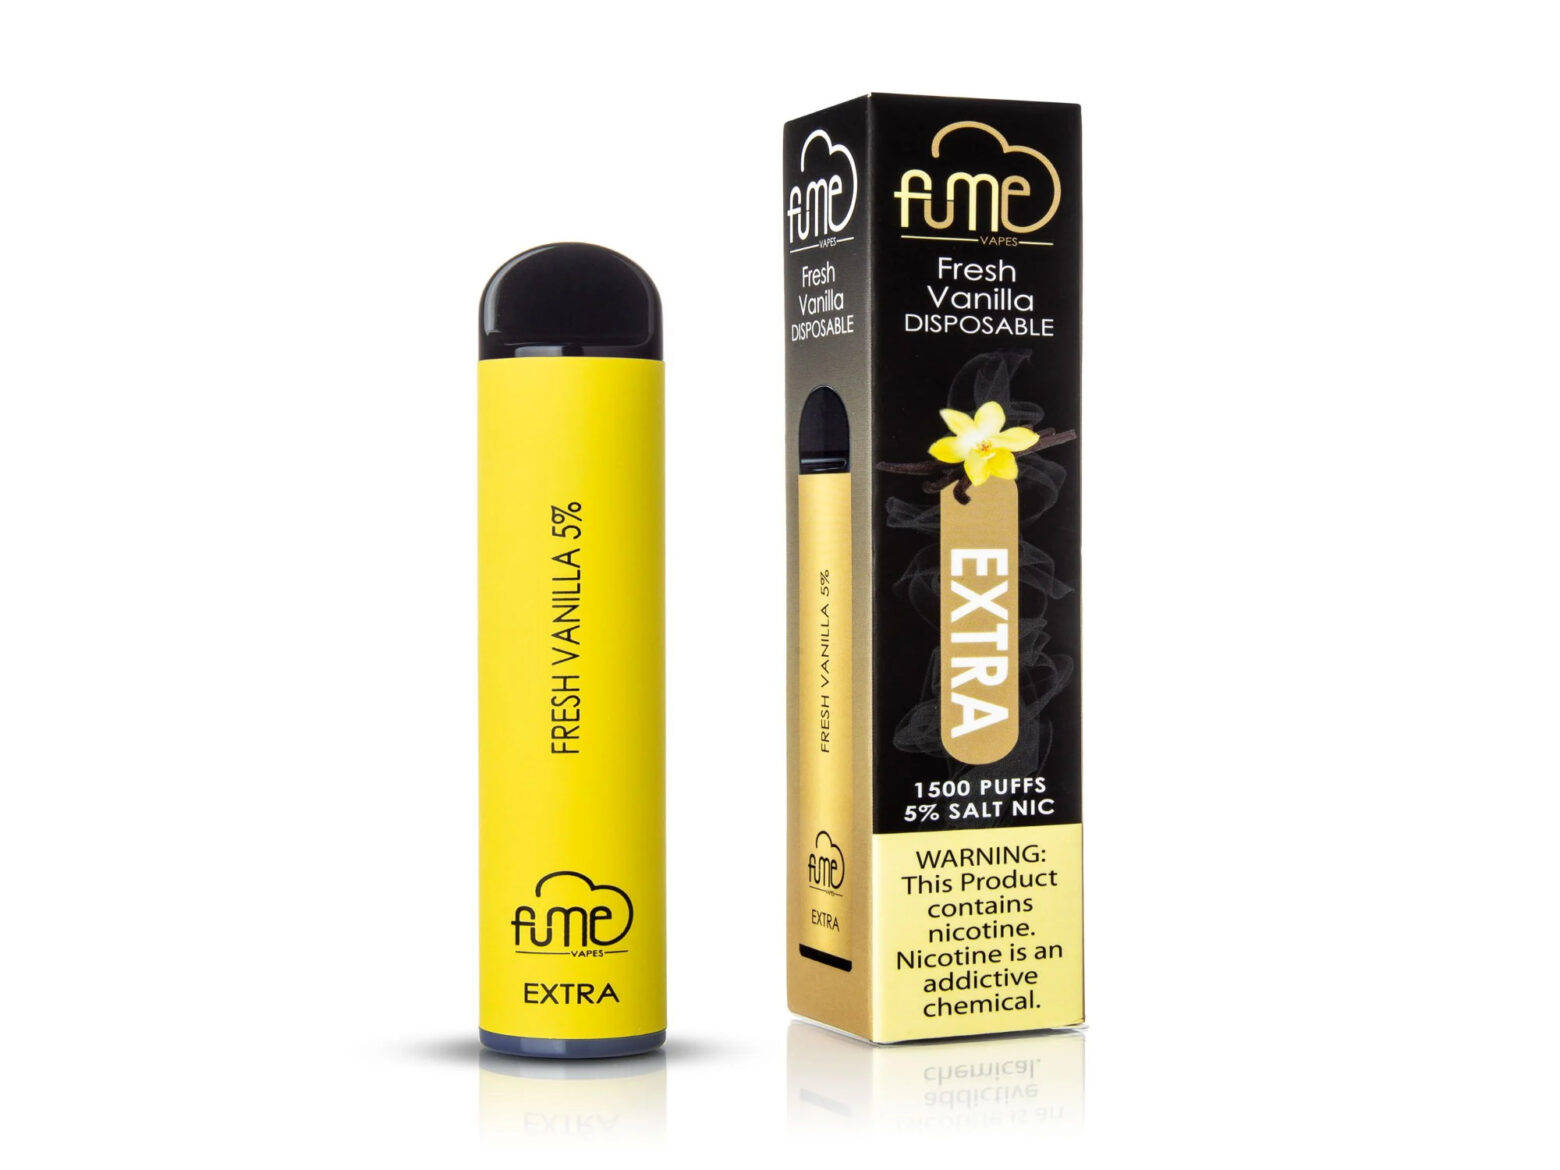 Fume Extra Disposable Vape 1500 Puff Review